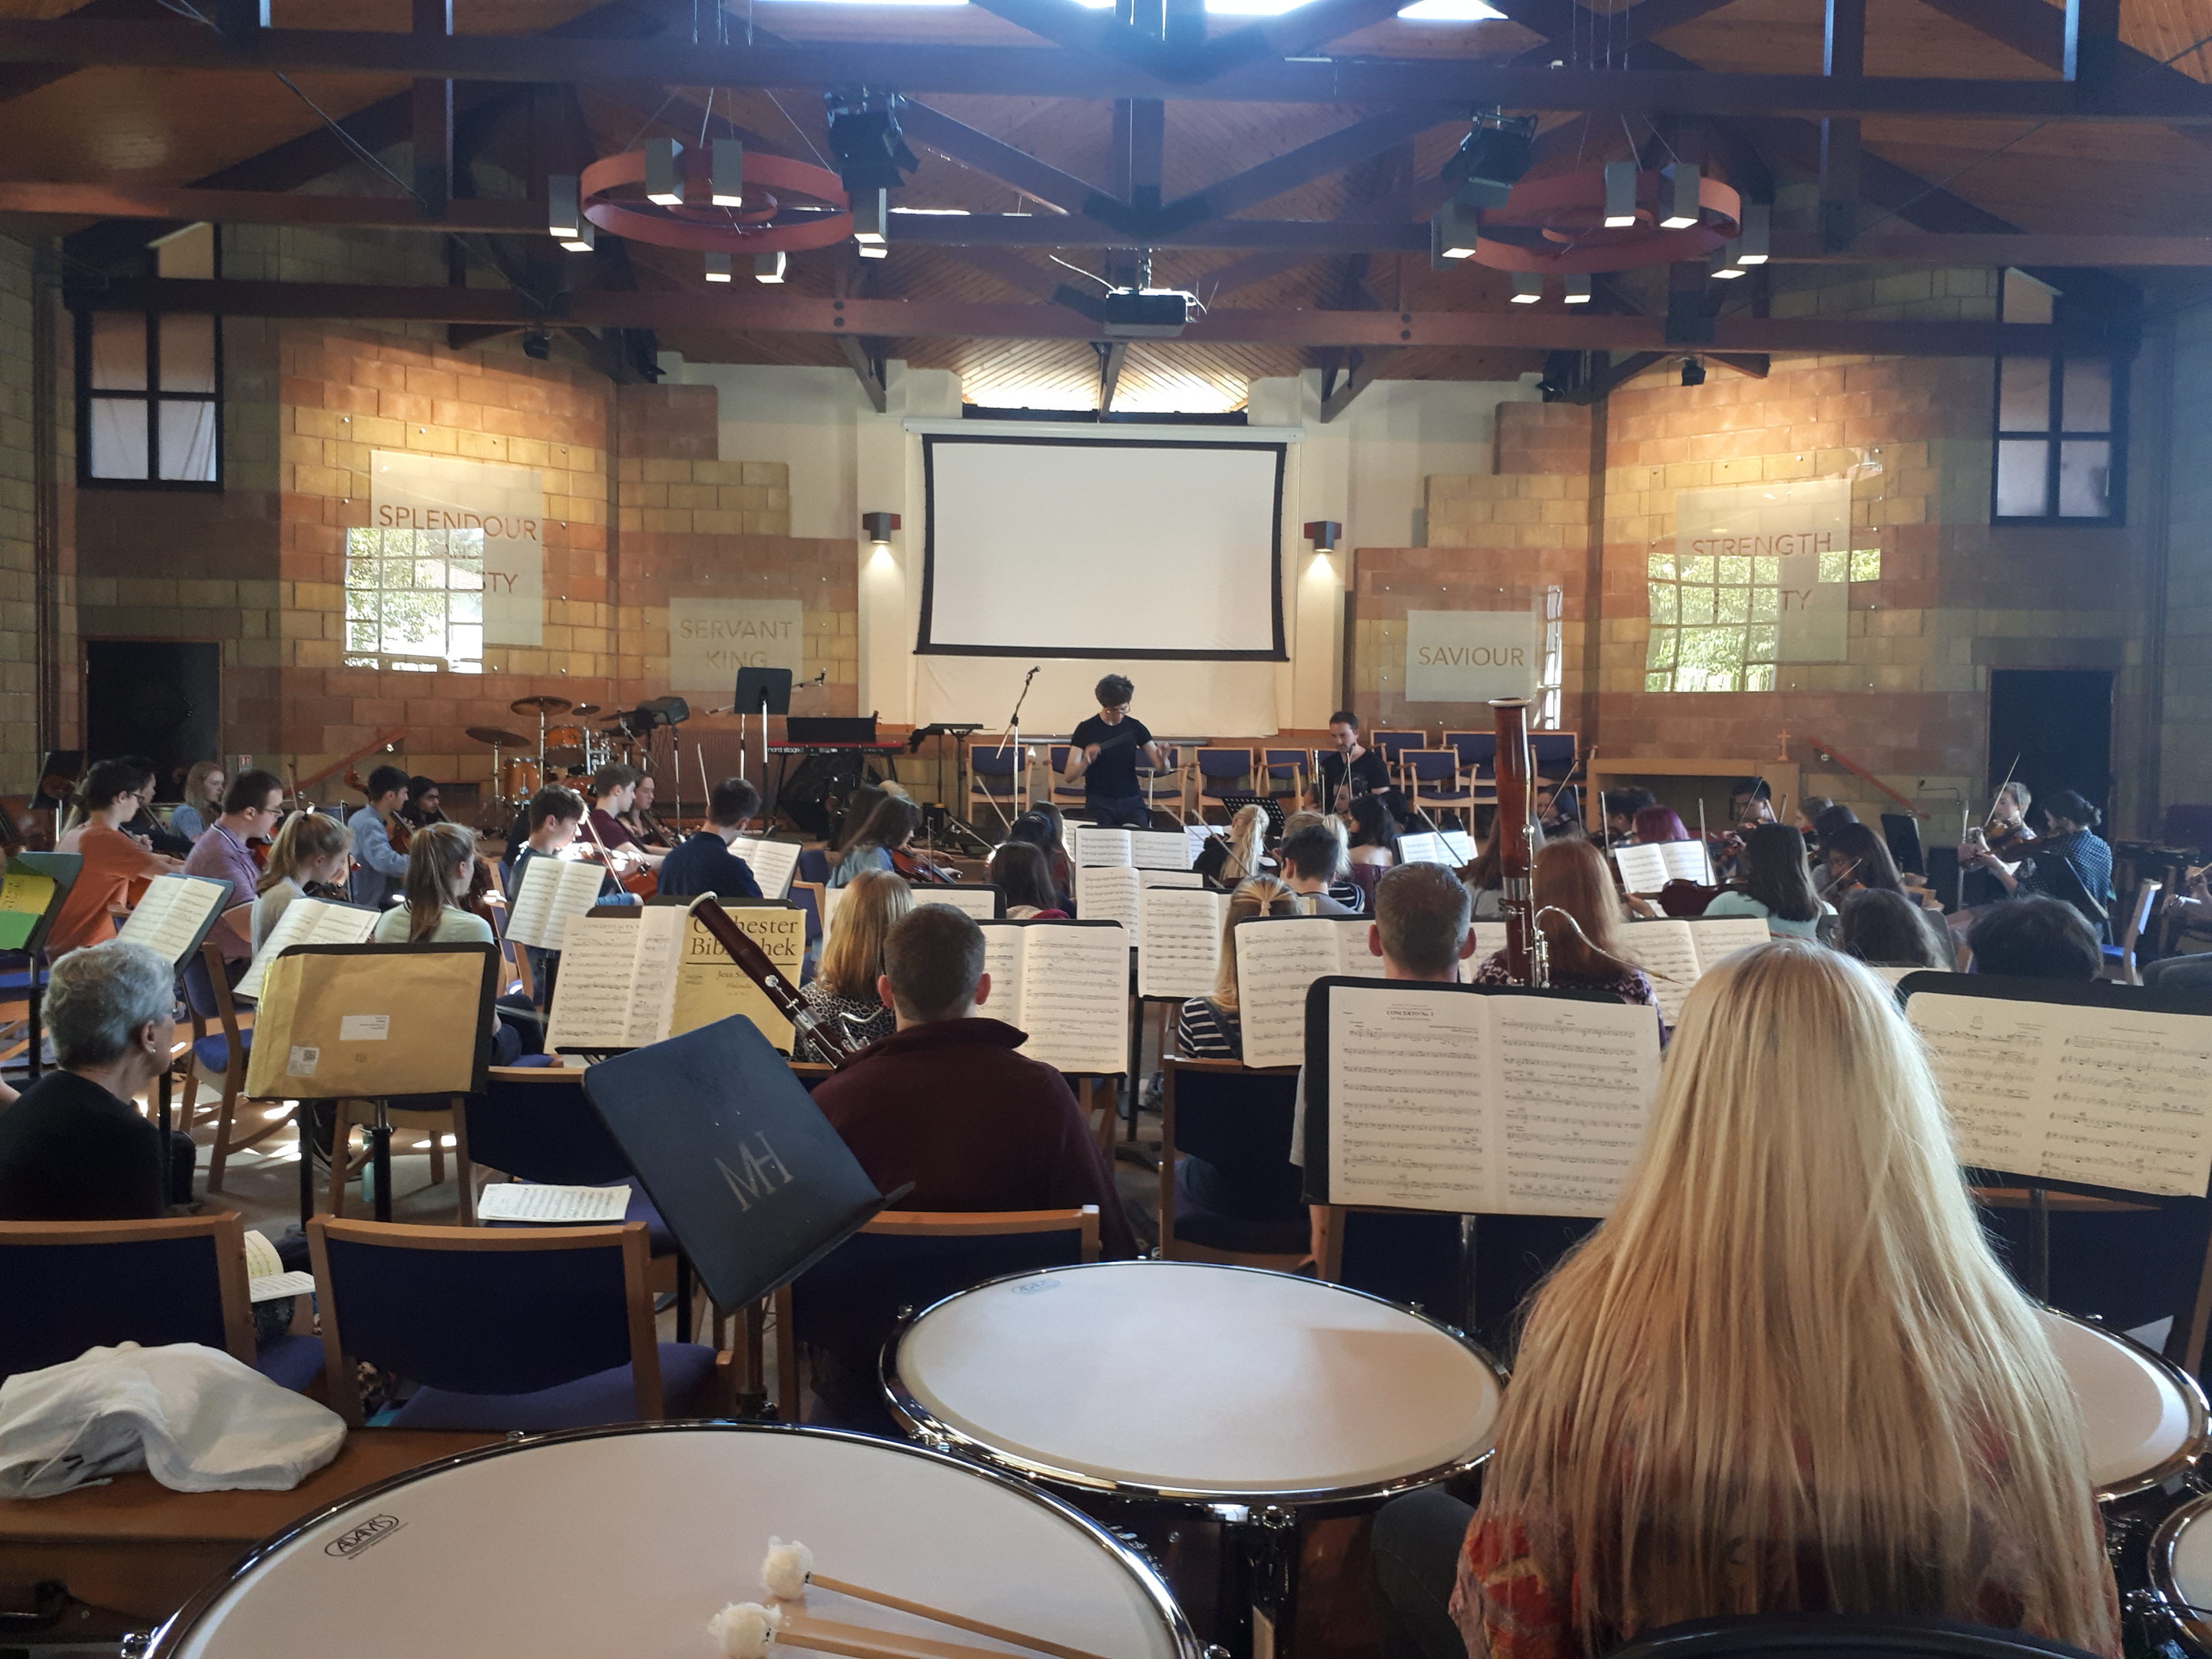 The Grampian Youth Orchestra at full rehearsal ahead of their 2018 concert in Aberdeen.